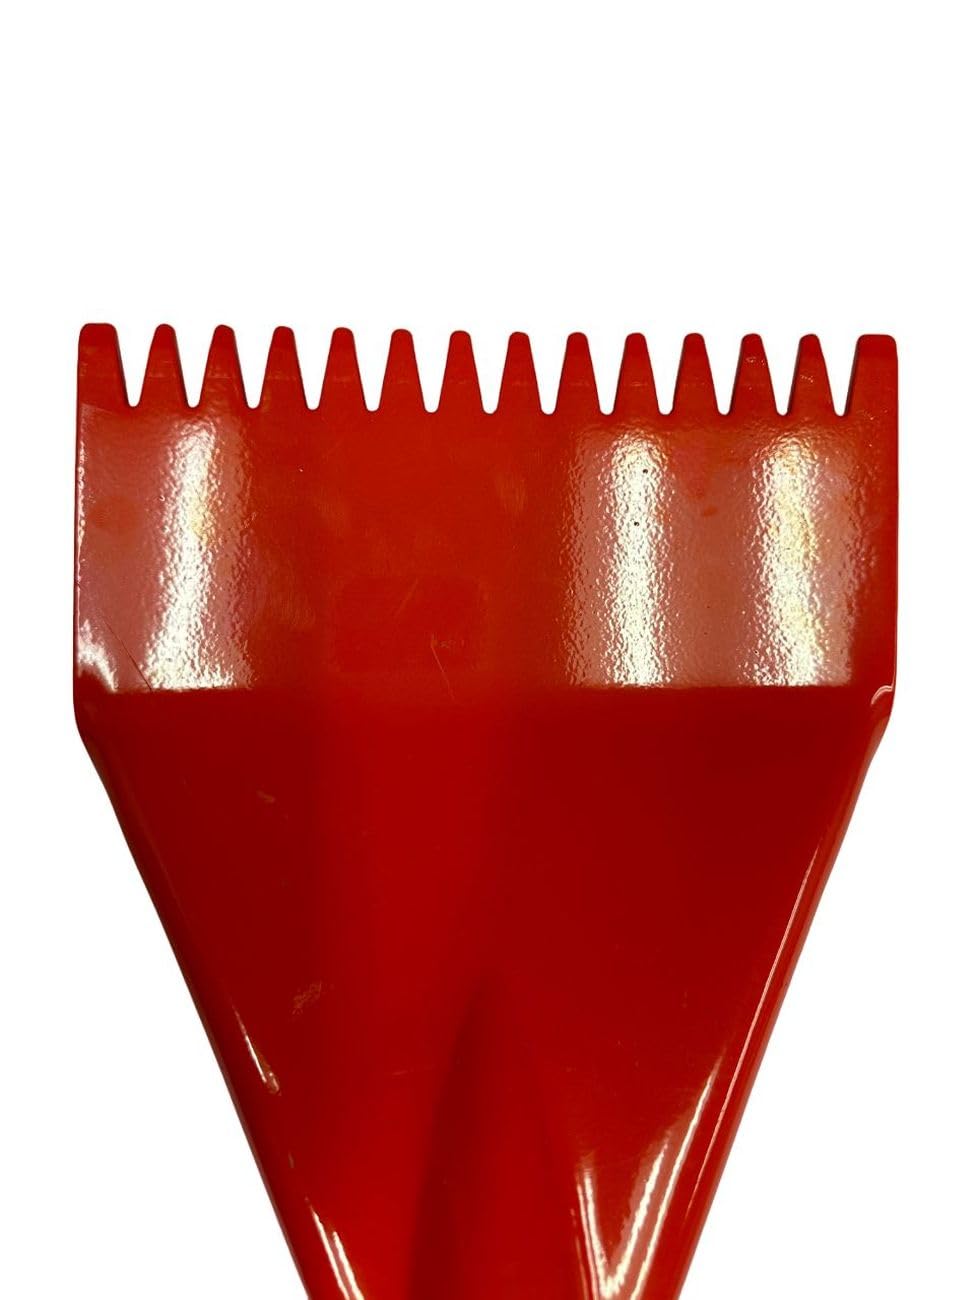 Zeluga ZL255 | D-Grip Handle Shingle Remover and Ripper